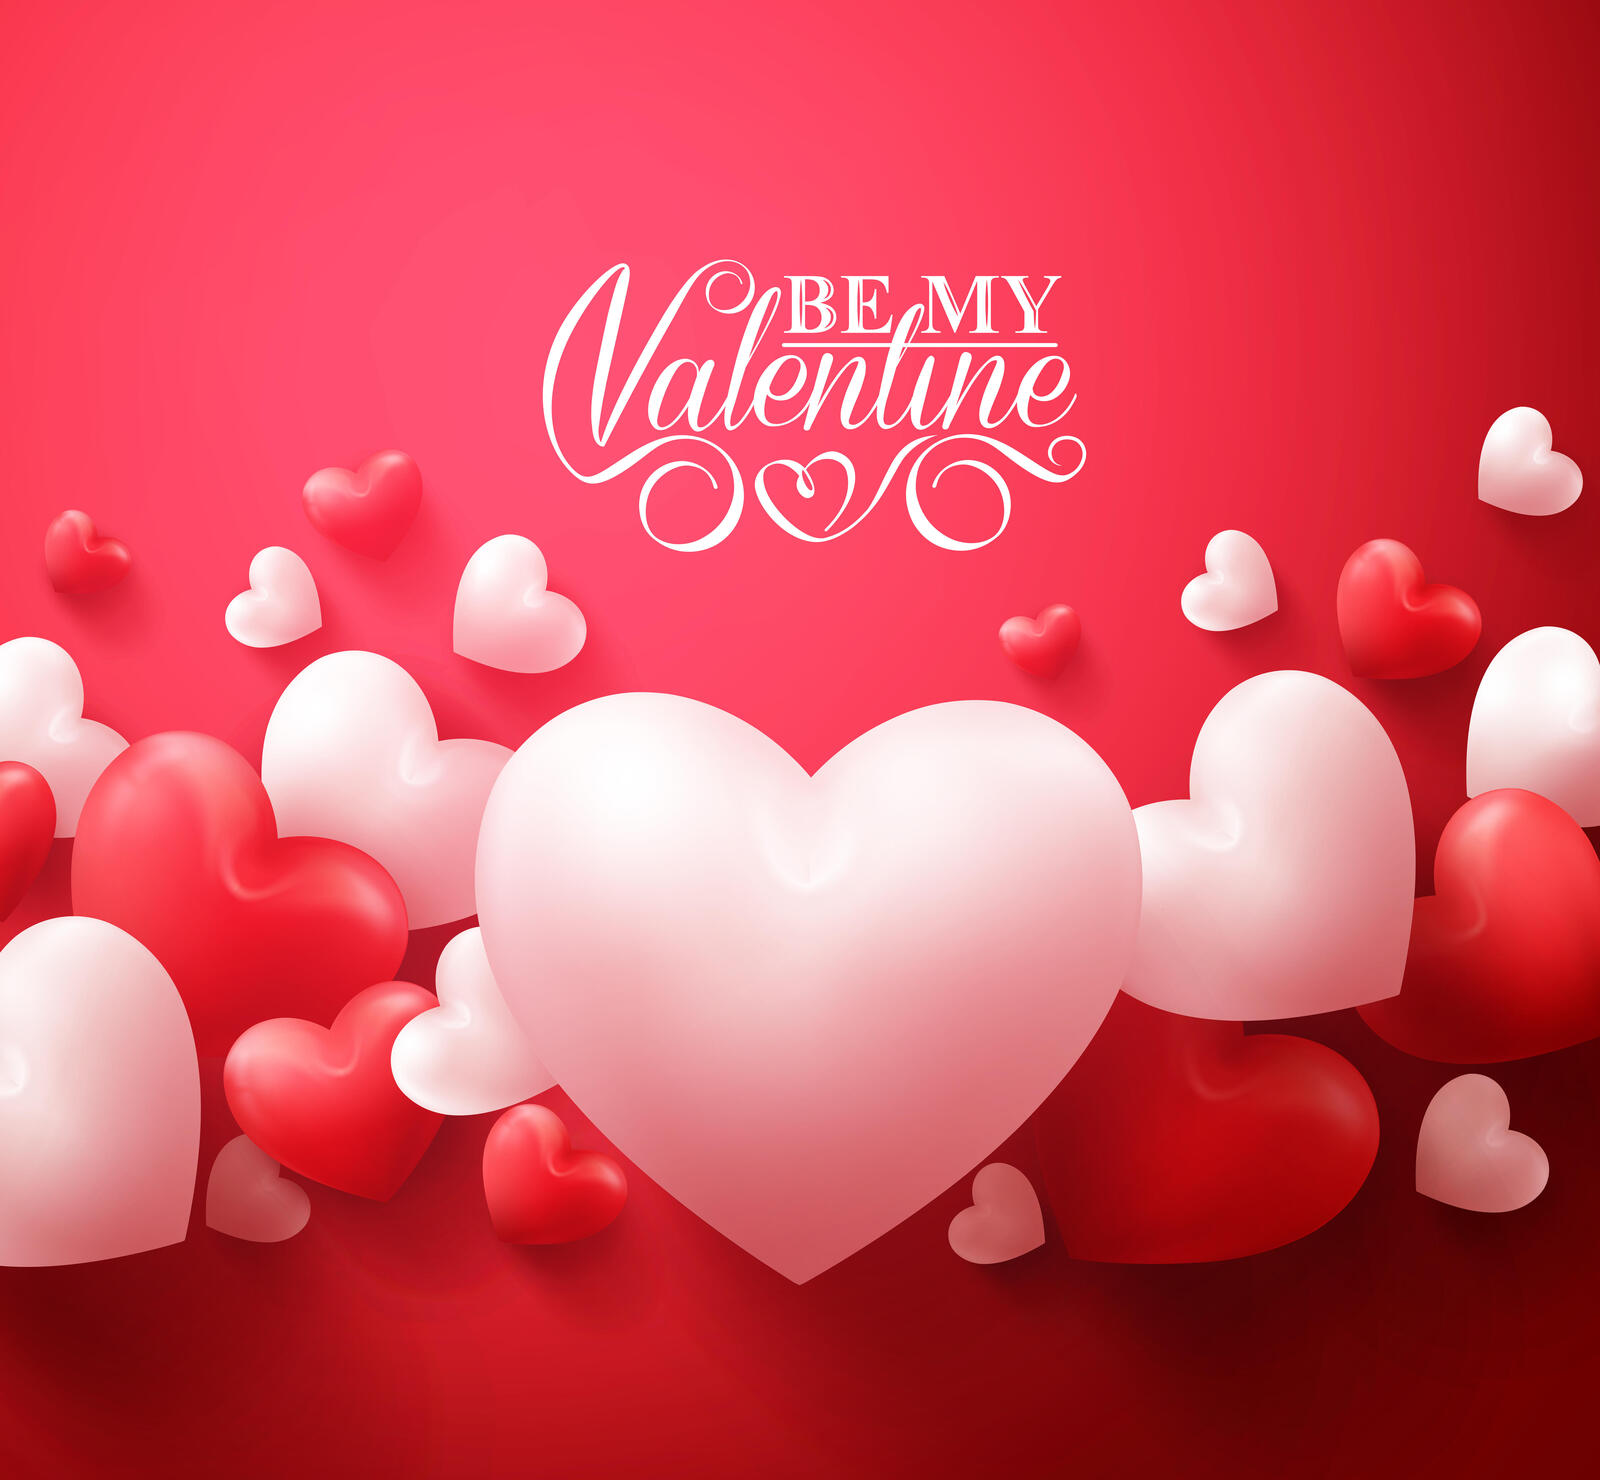 Wallpapers hearts holidays valentines on the desktop